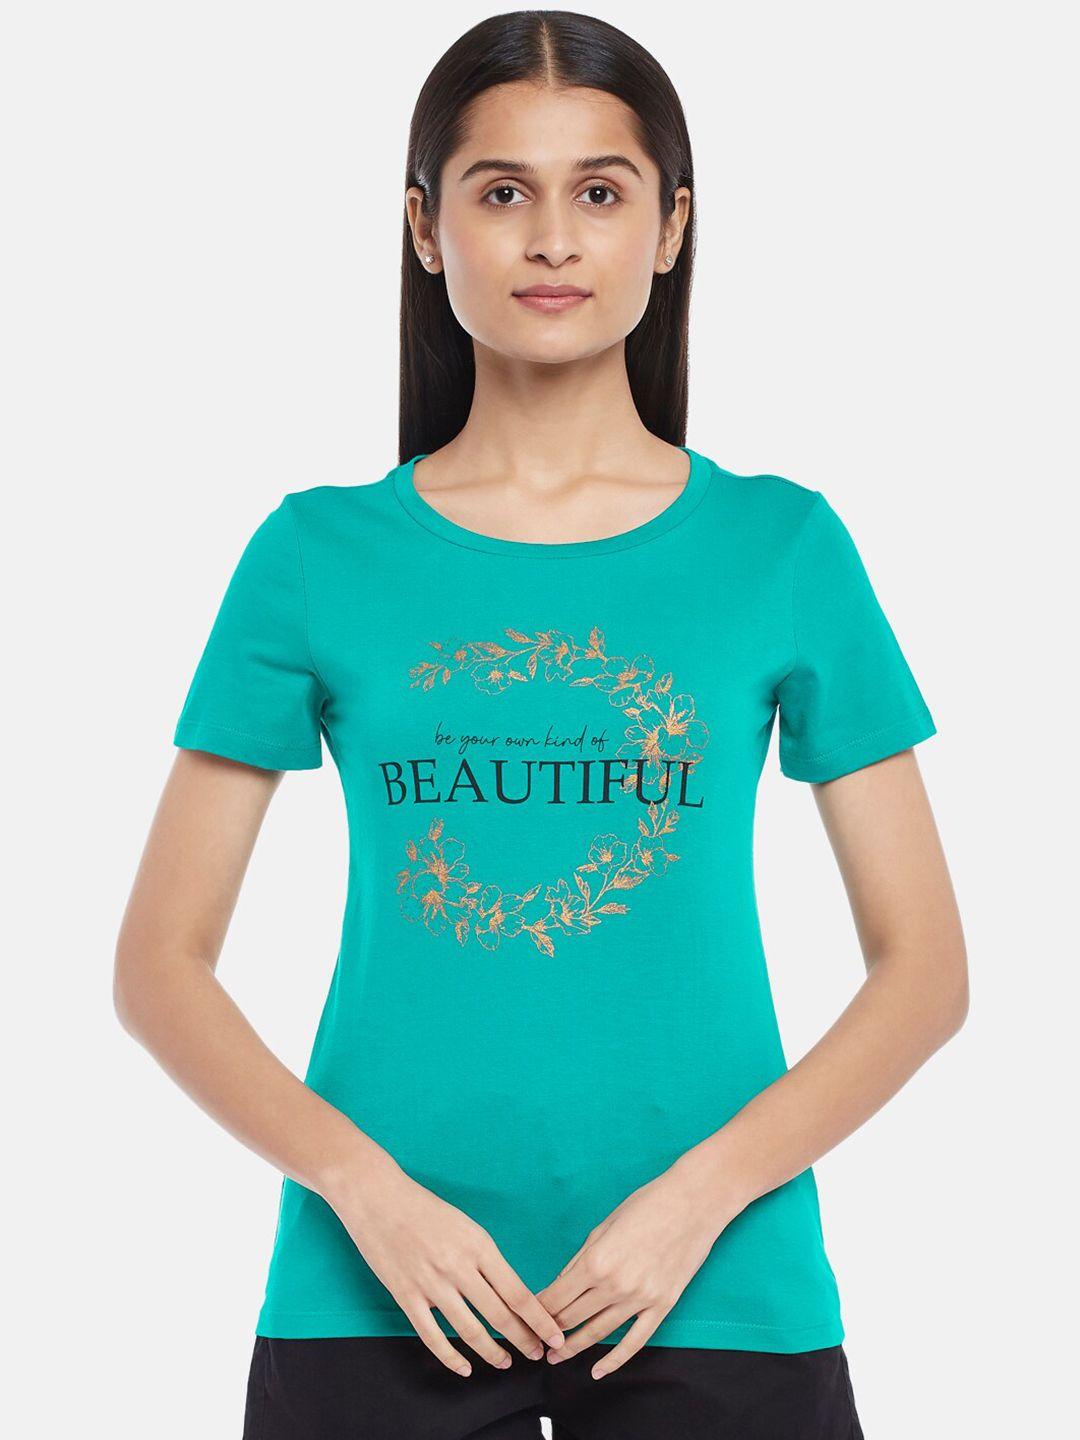 honey by pantaloons women teal typography printed t-shirt